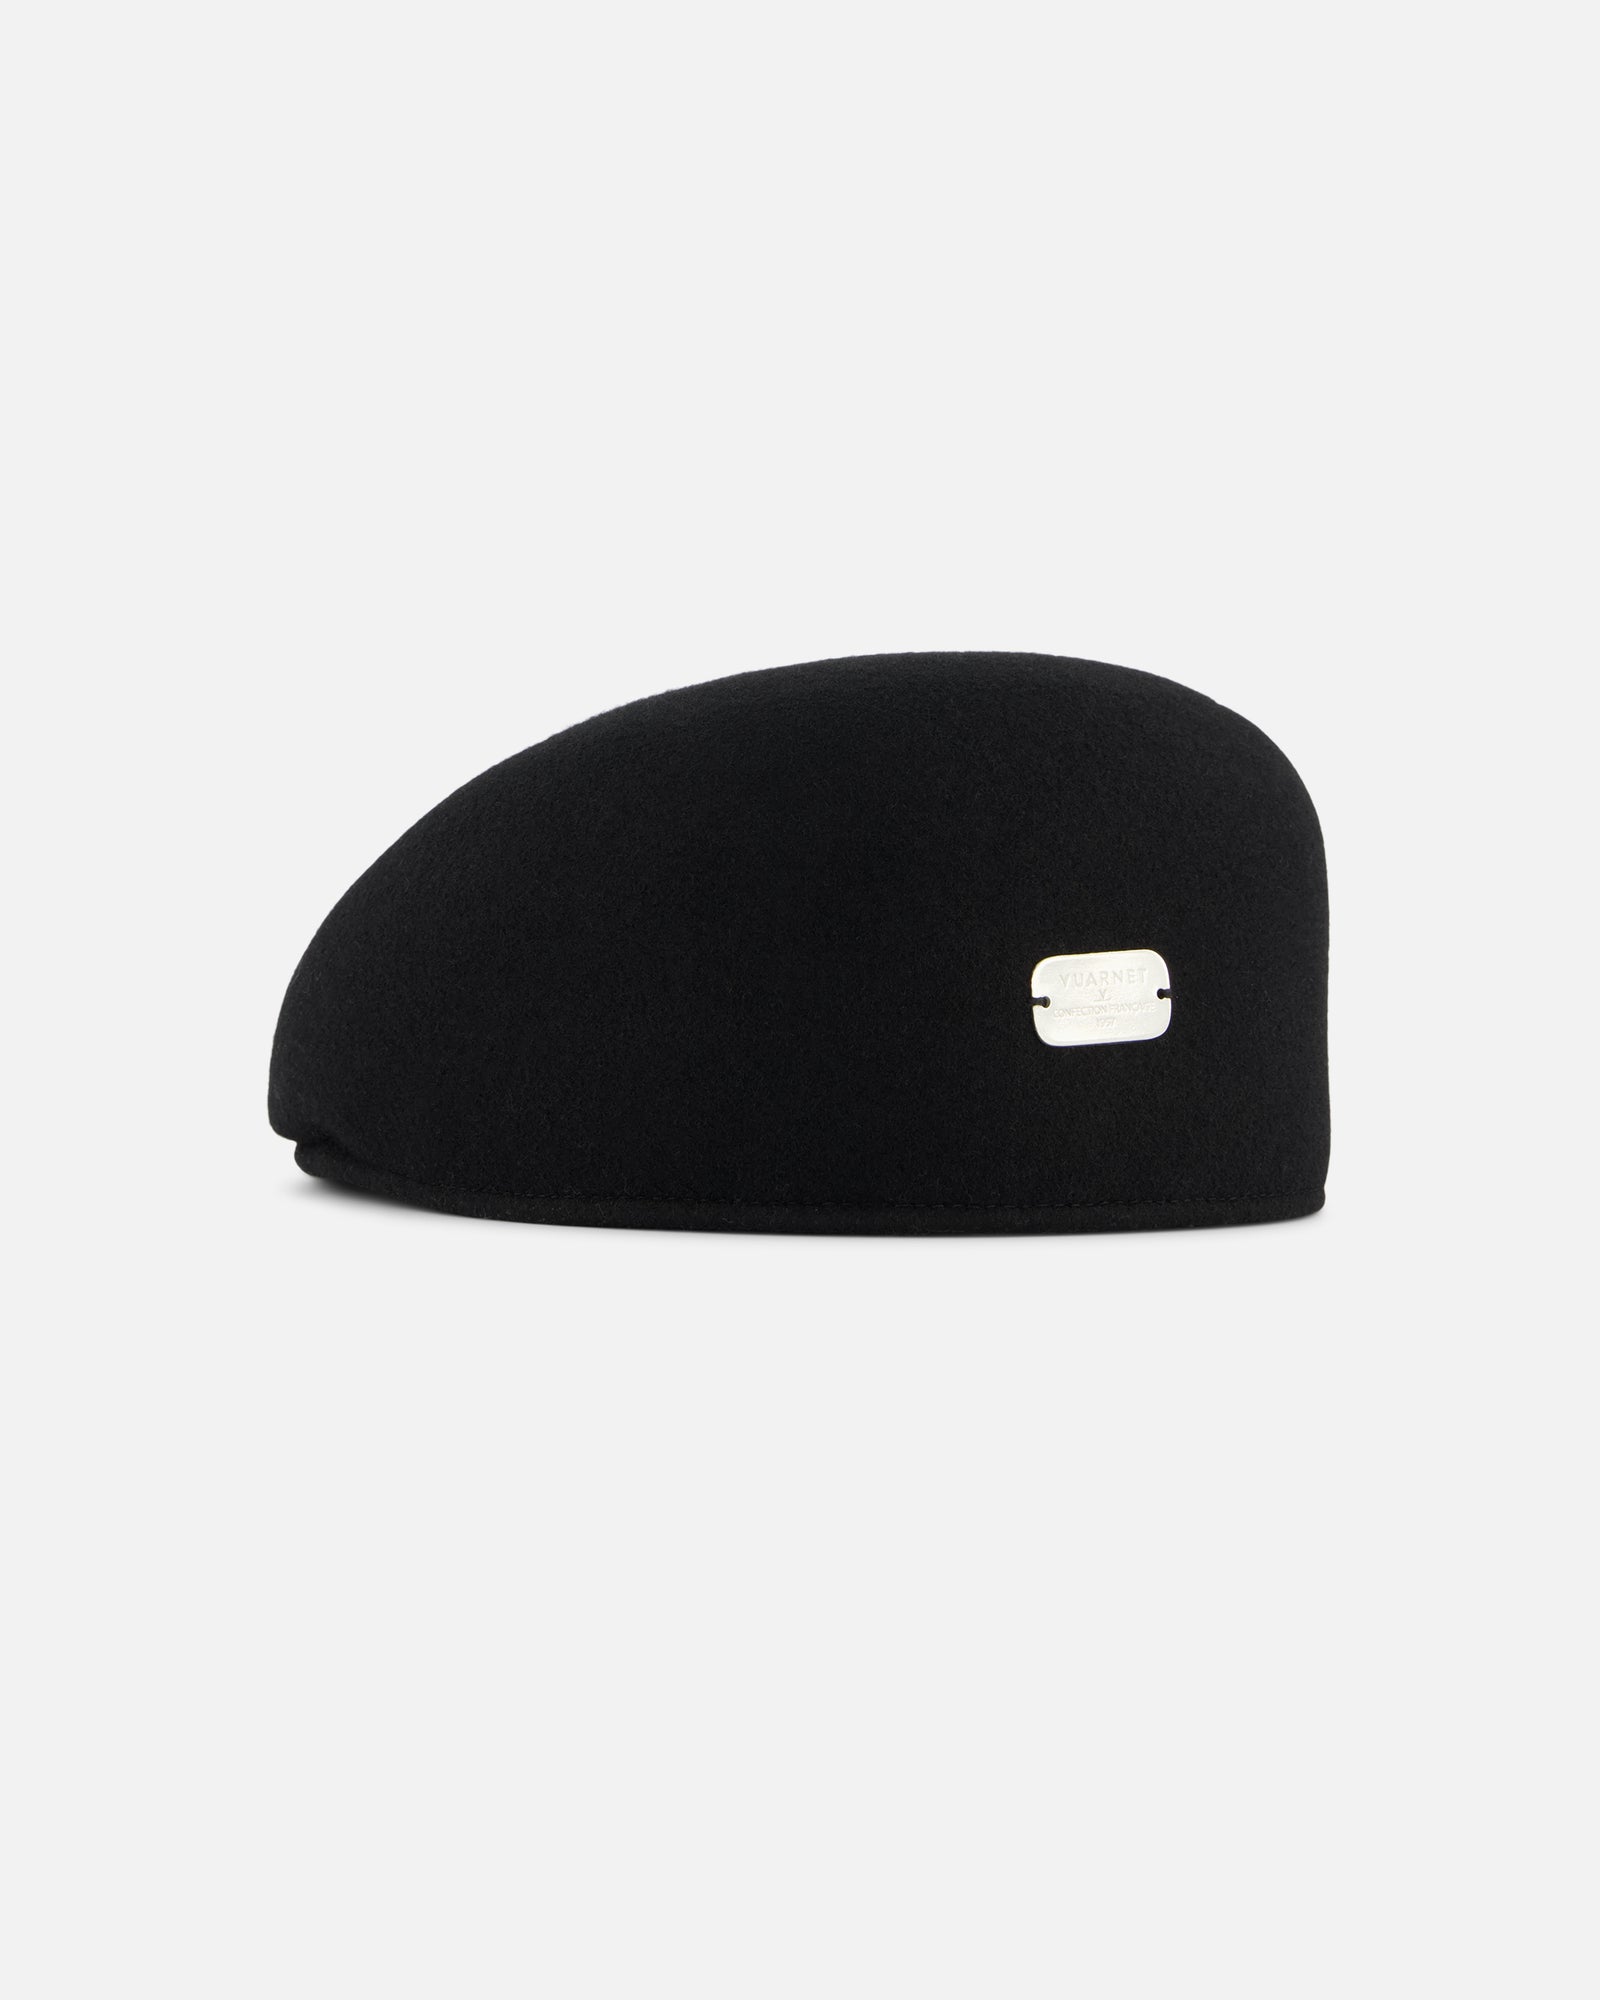 French cap - Final Sale